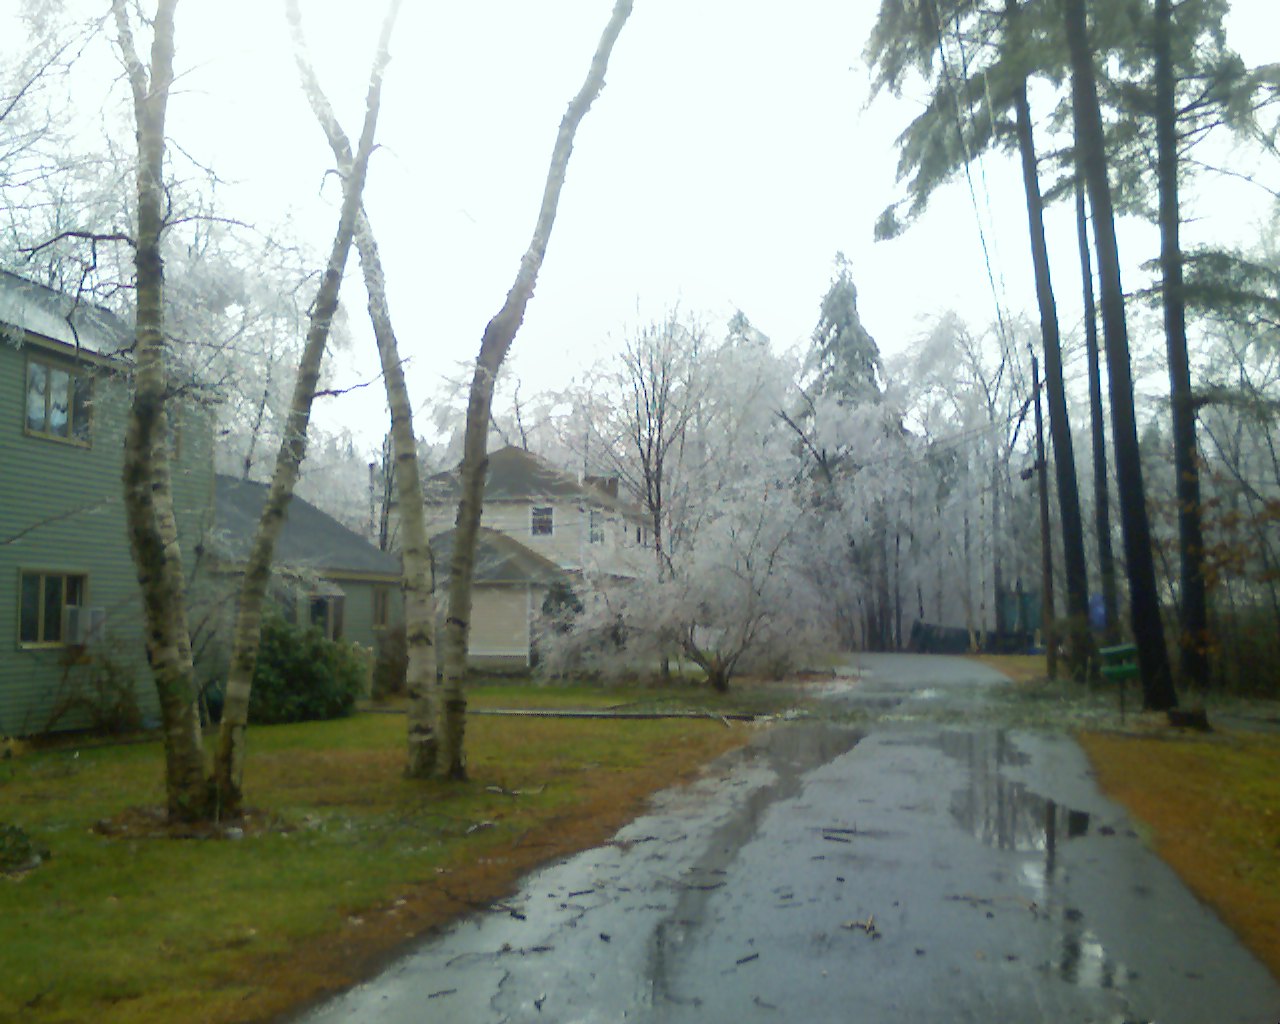 Ice Storm  (user submitted)